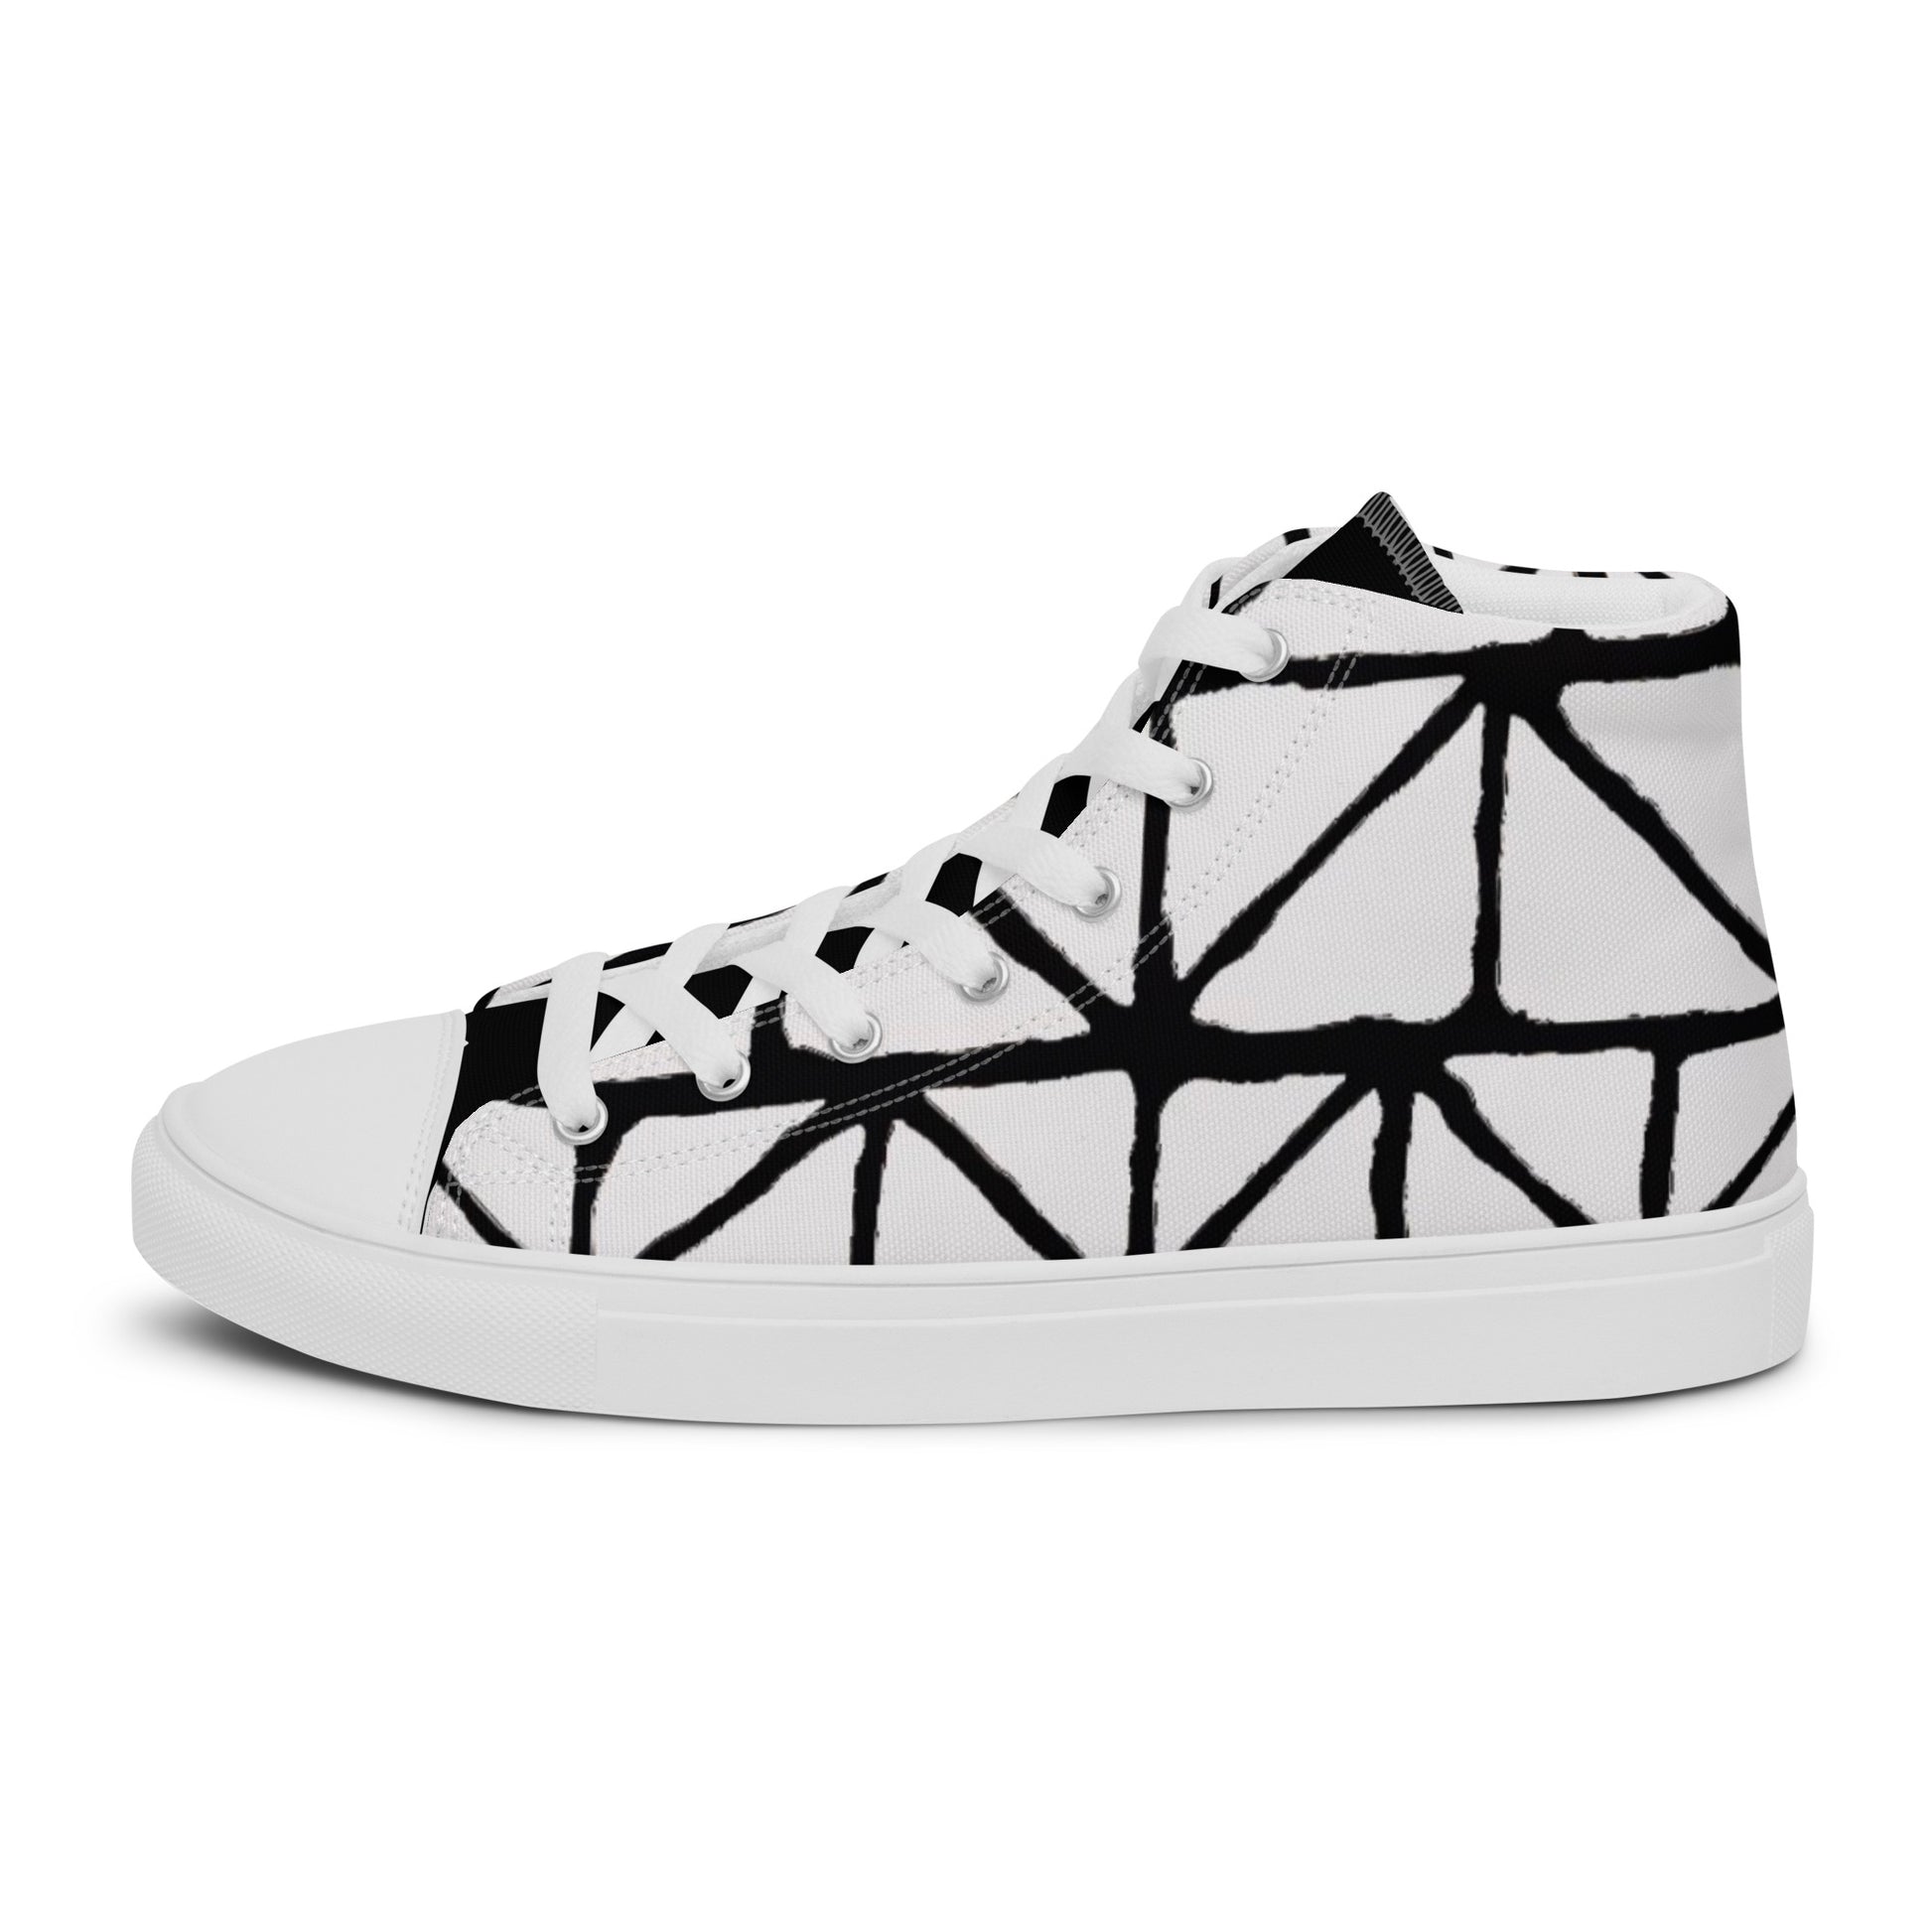 Tribal Print Black and White Women’s High Top Canvas Shoes | Geometric Print Shoes | Stylish Festival Sneakers | Casual | Lace Up Sneakers - Comfortable Culture - Shoes - Comfortable Culture